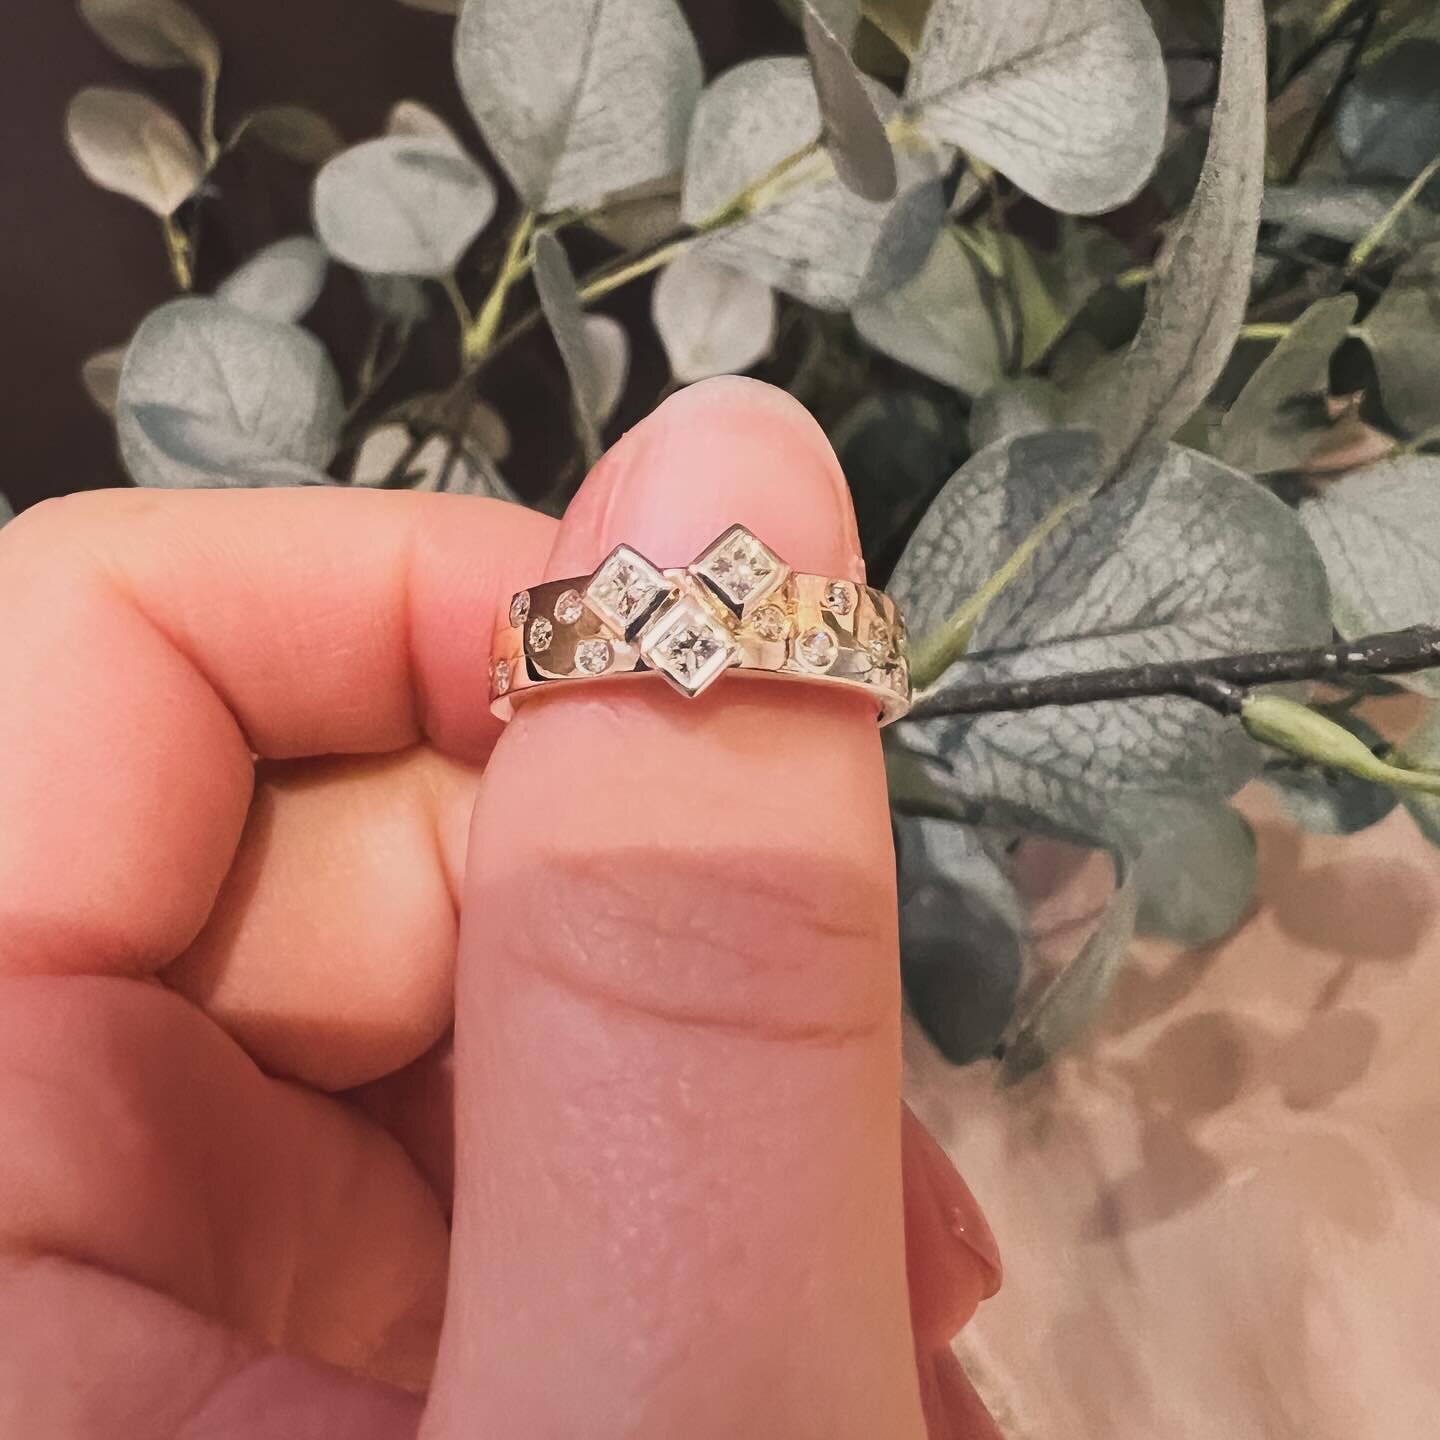 From old ring to new ring 👉 Swipe to see 👉

The story&hellip;
Simone unfortunately lost a diamond from her old engagement ring, but we turned it into an opportunity to create something beautiful! 💍 We had 3 diamonds to work with in a princess cut 